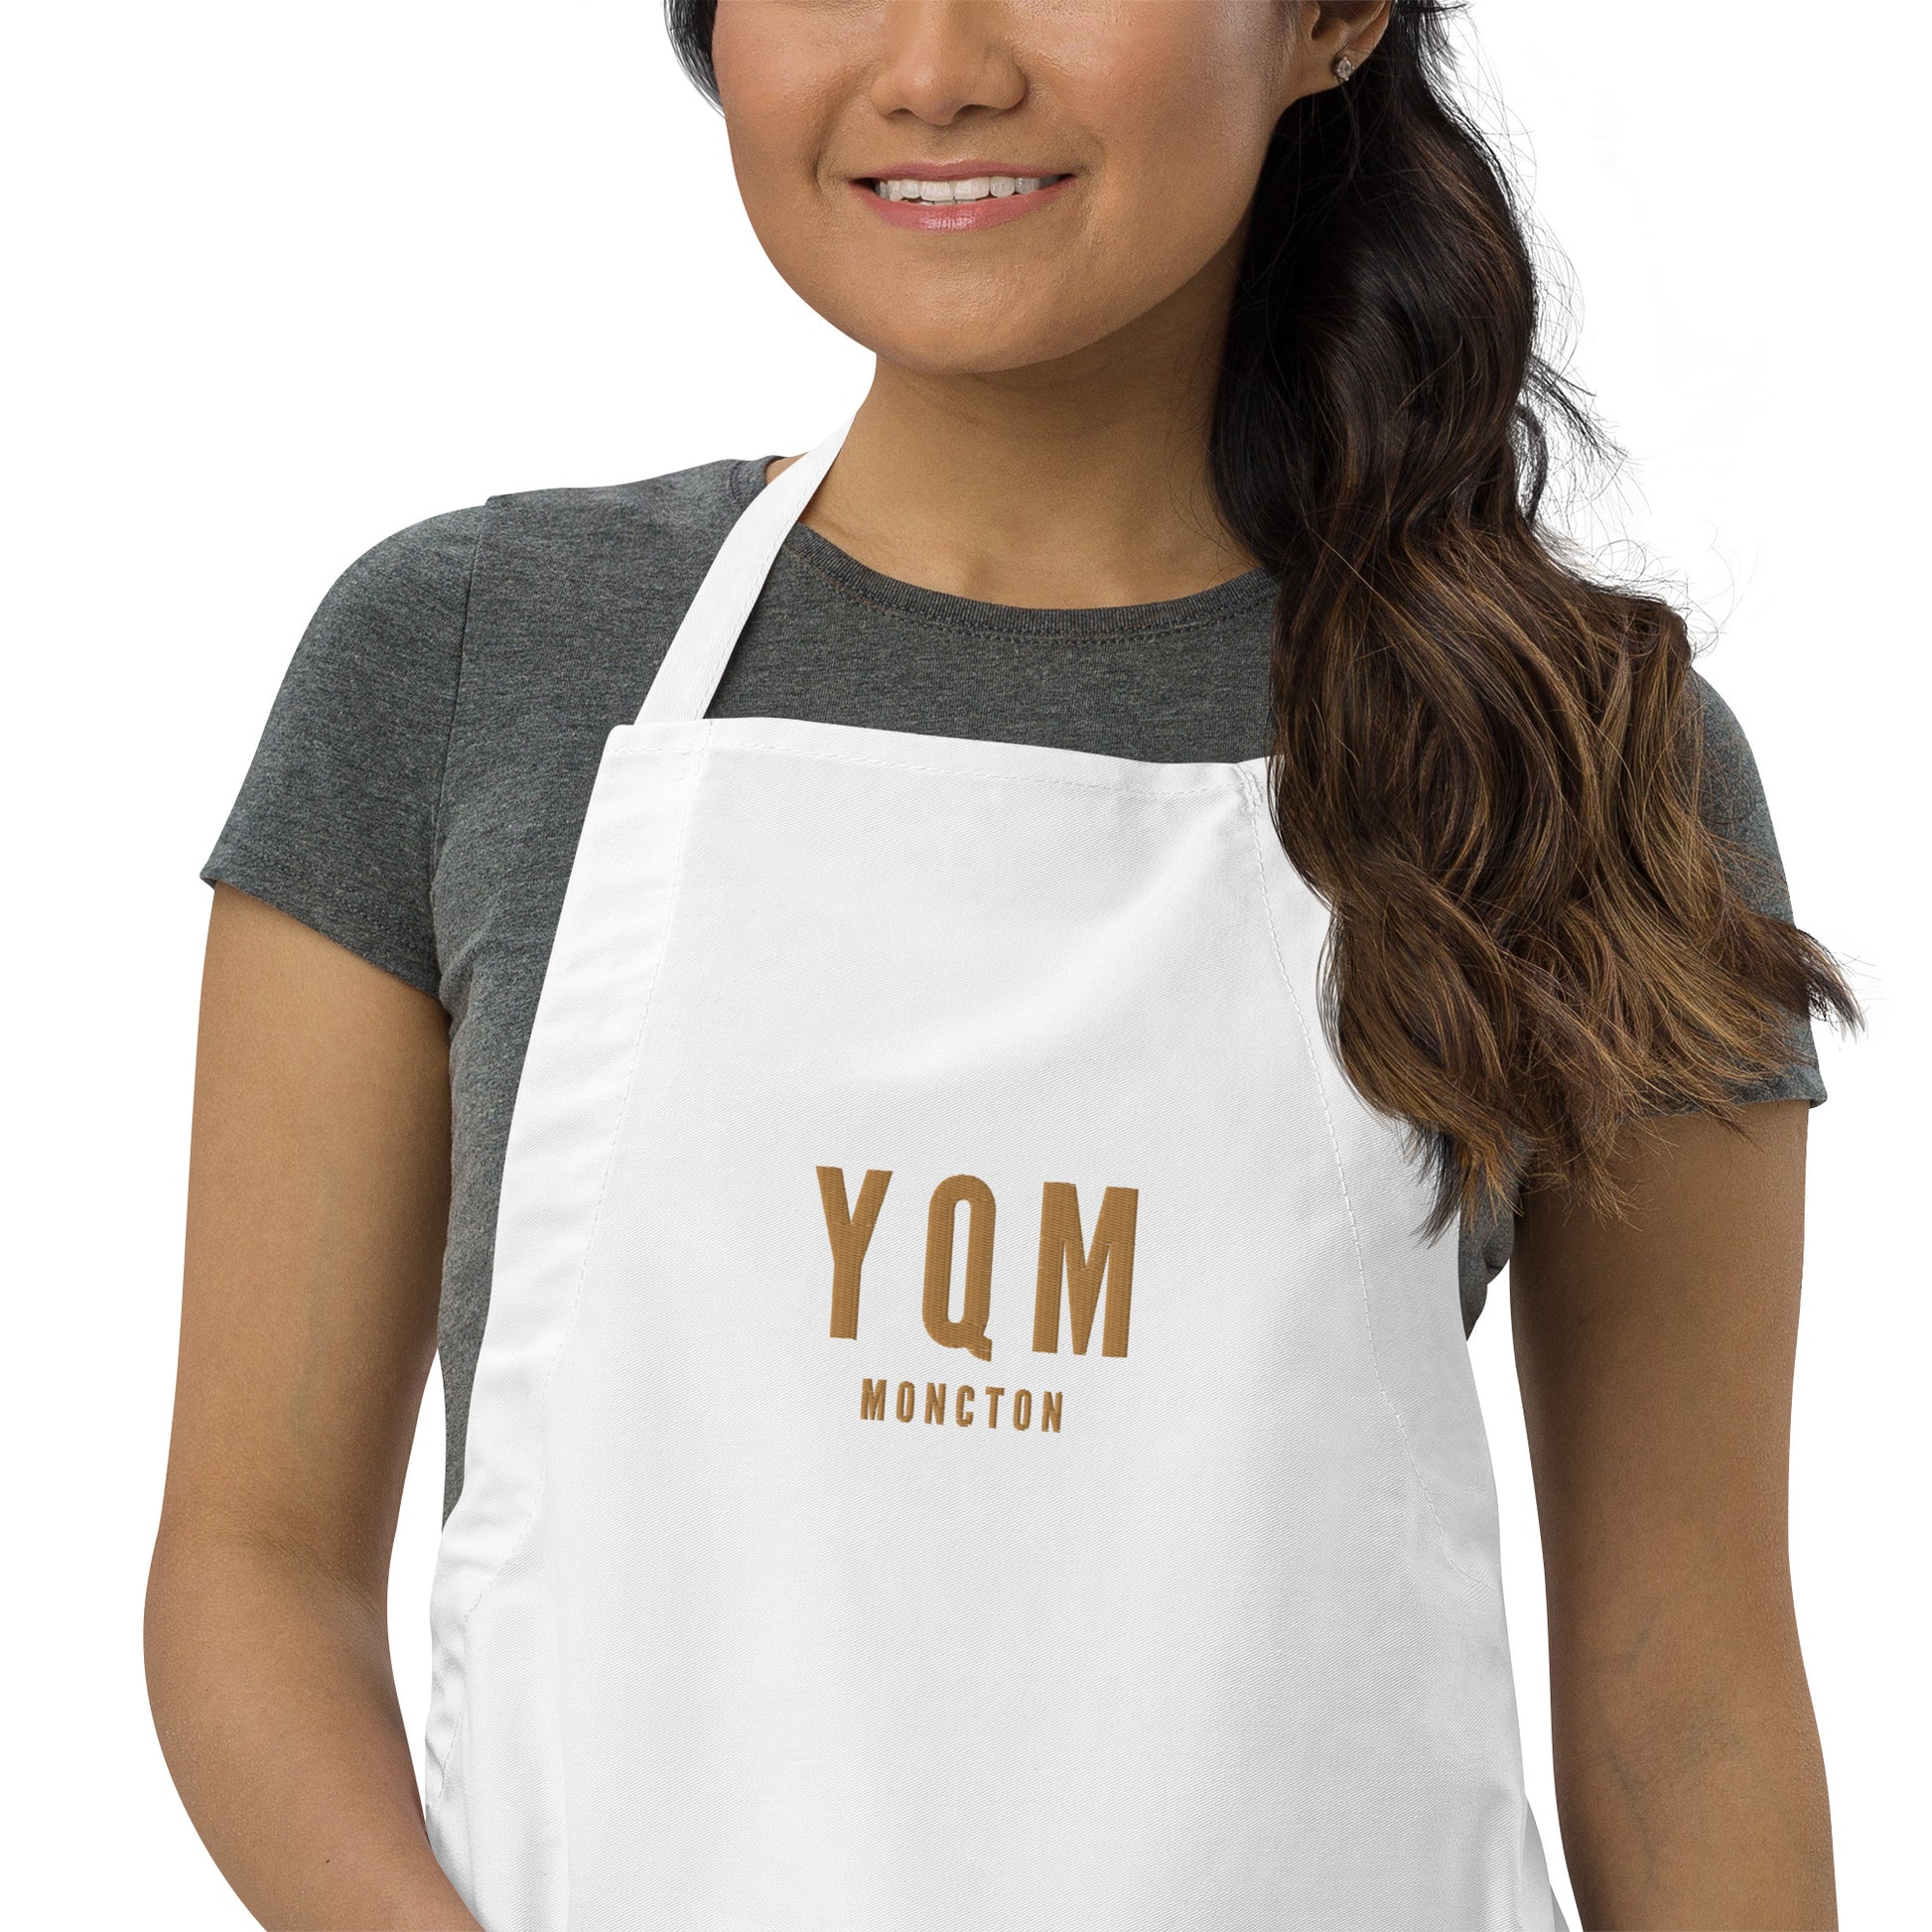 City Embroidered Apron - Old Gold • YQM Moncton • YHM Designs - Image 08